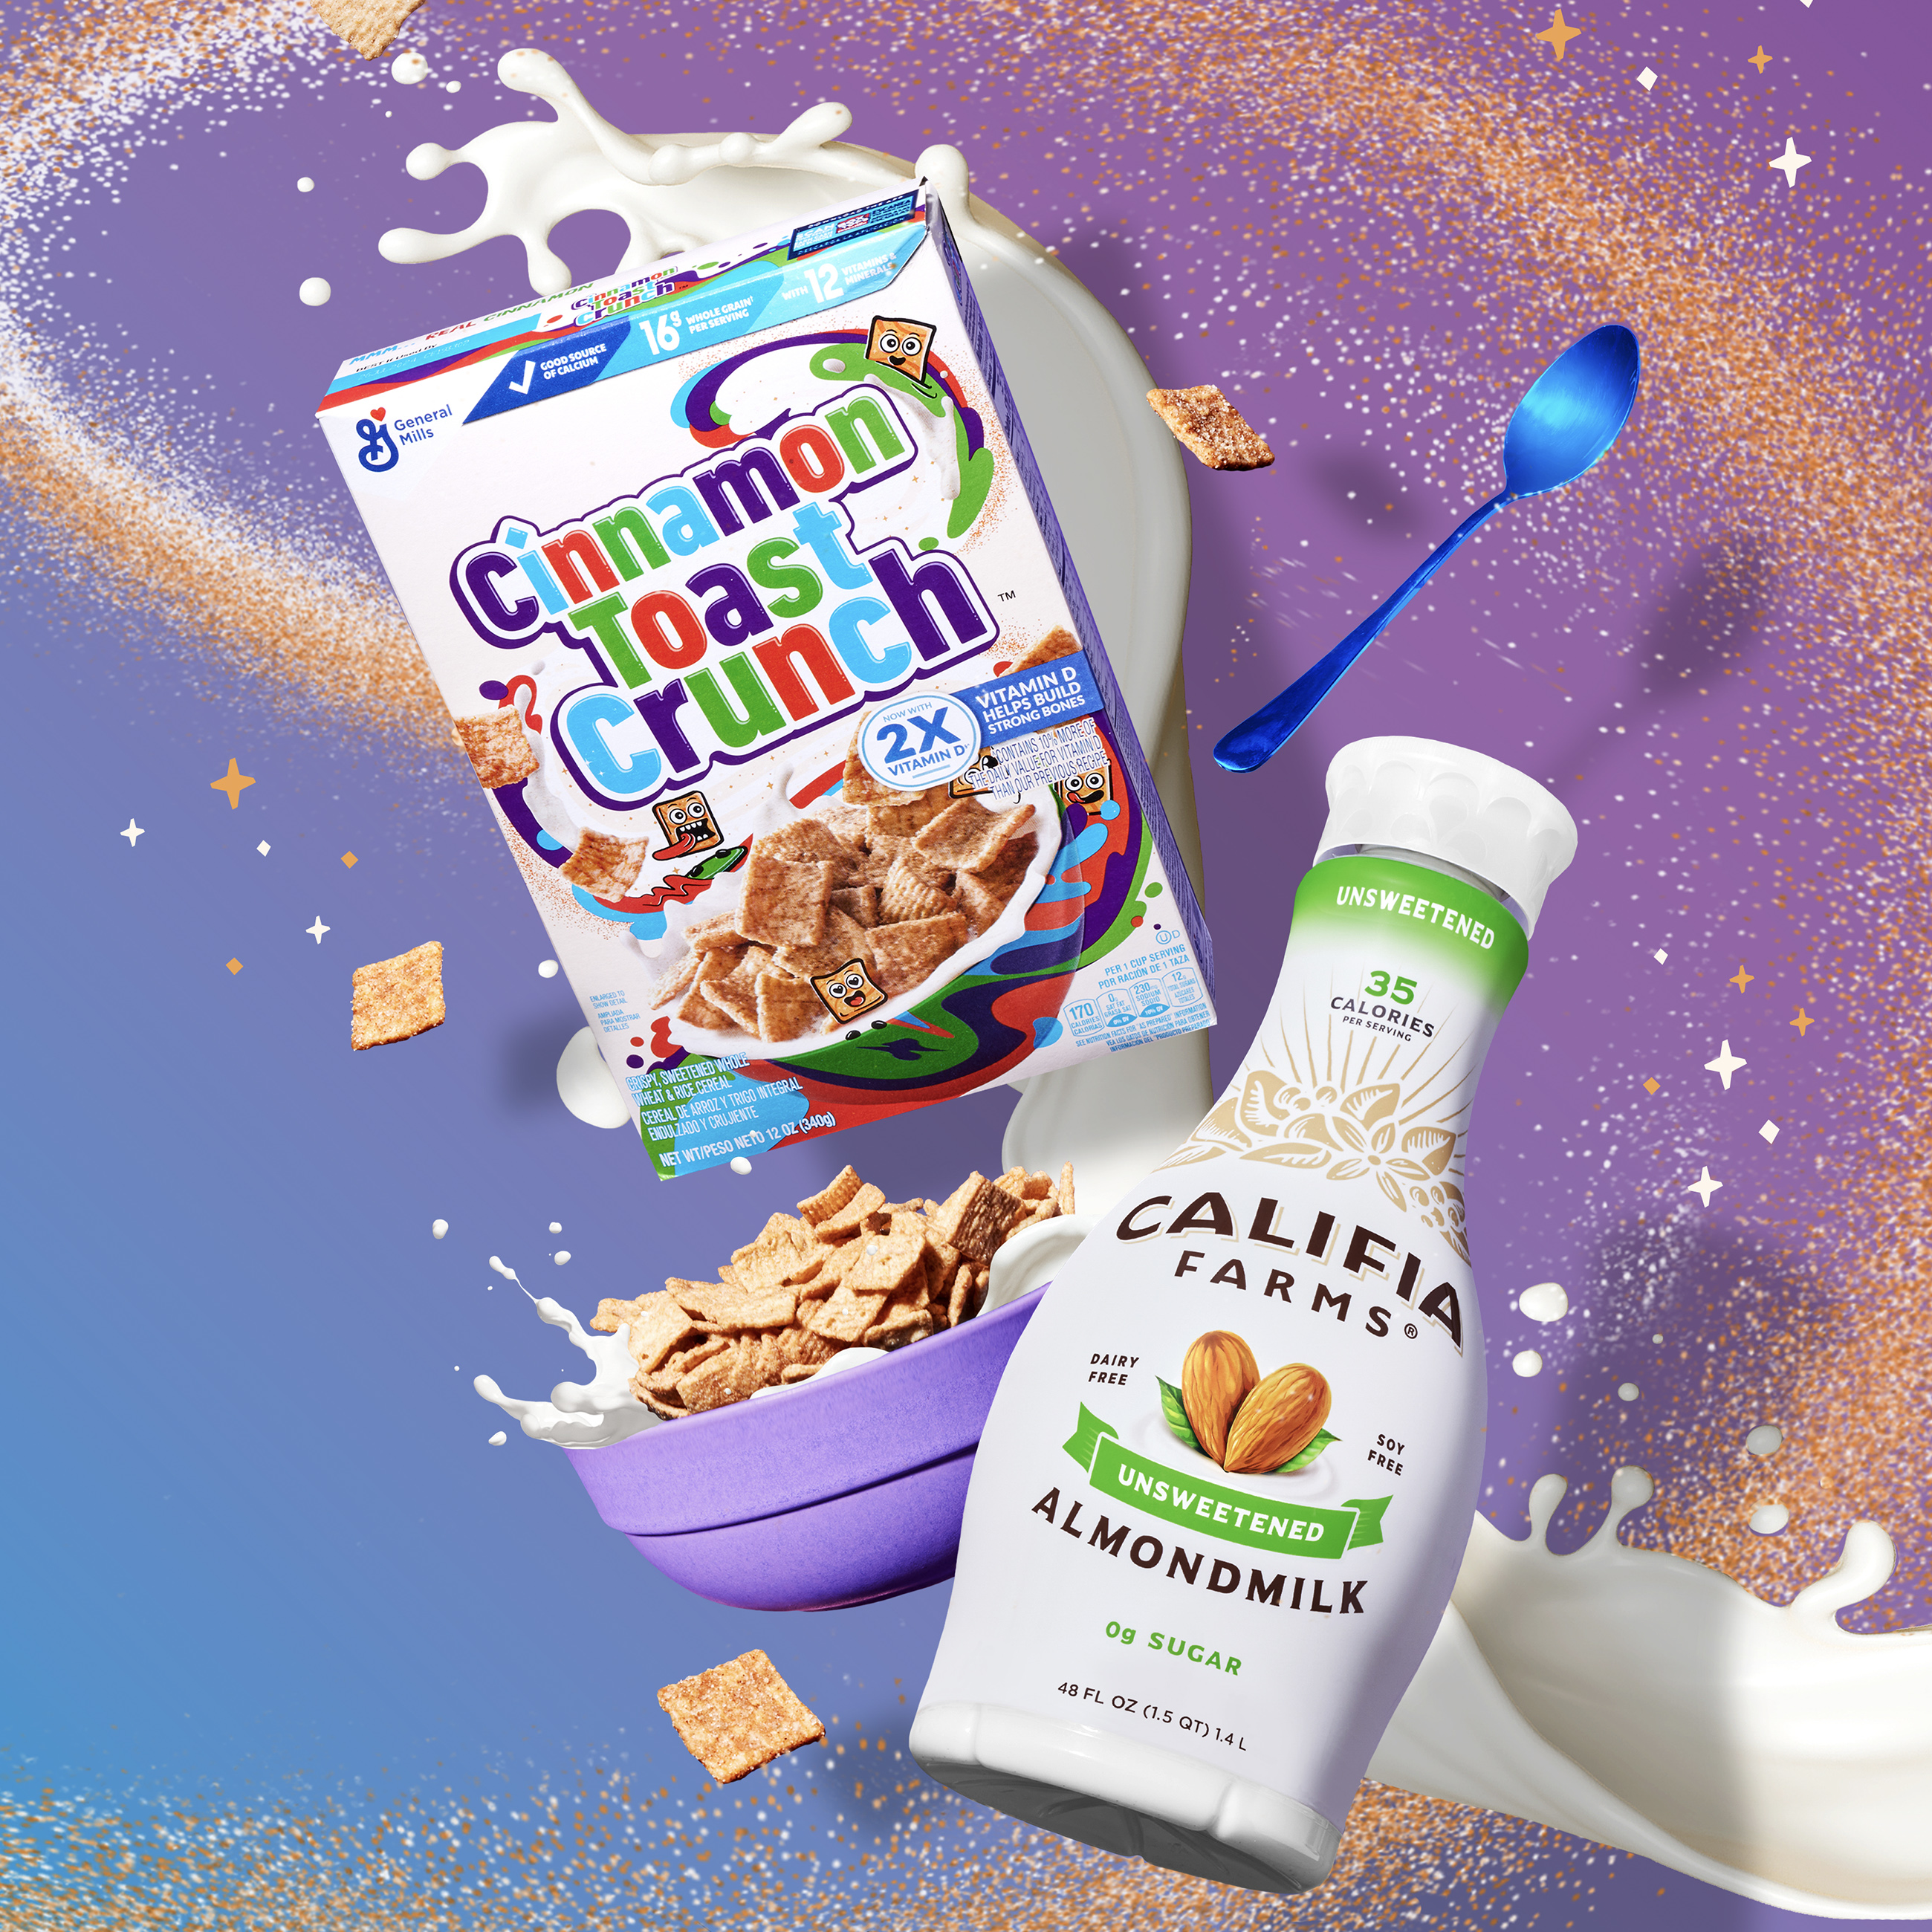 CALIFIA FARMS® AND CINNAMON TOAST CRUNCH™ LAUNCH 'SNACK ATTACK' SWEEPSTAKES TO CELEBRATE THE ULTIMATE, IRRESISTIBLY DELICIOUS ANYTIME SNACK